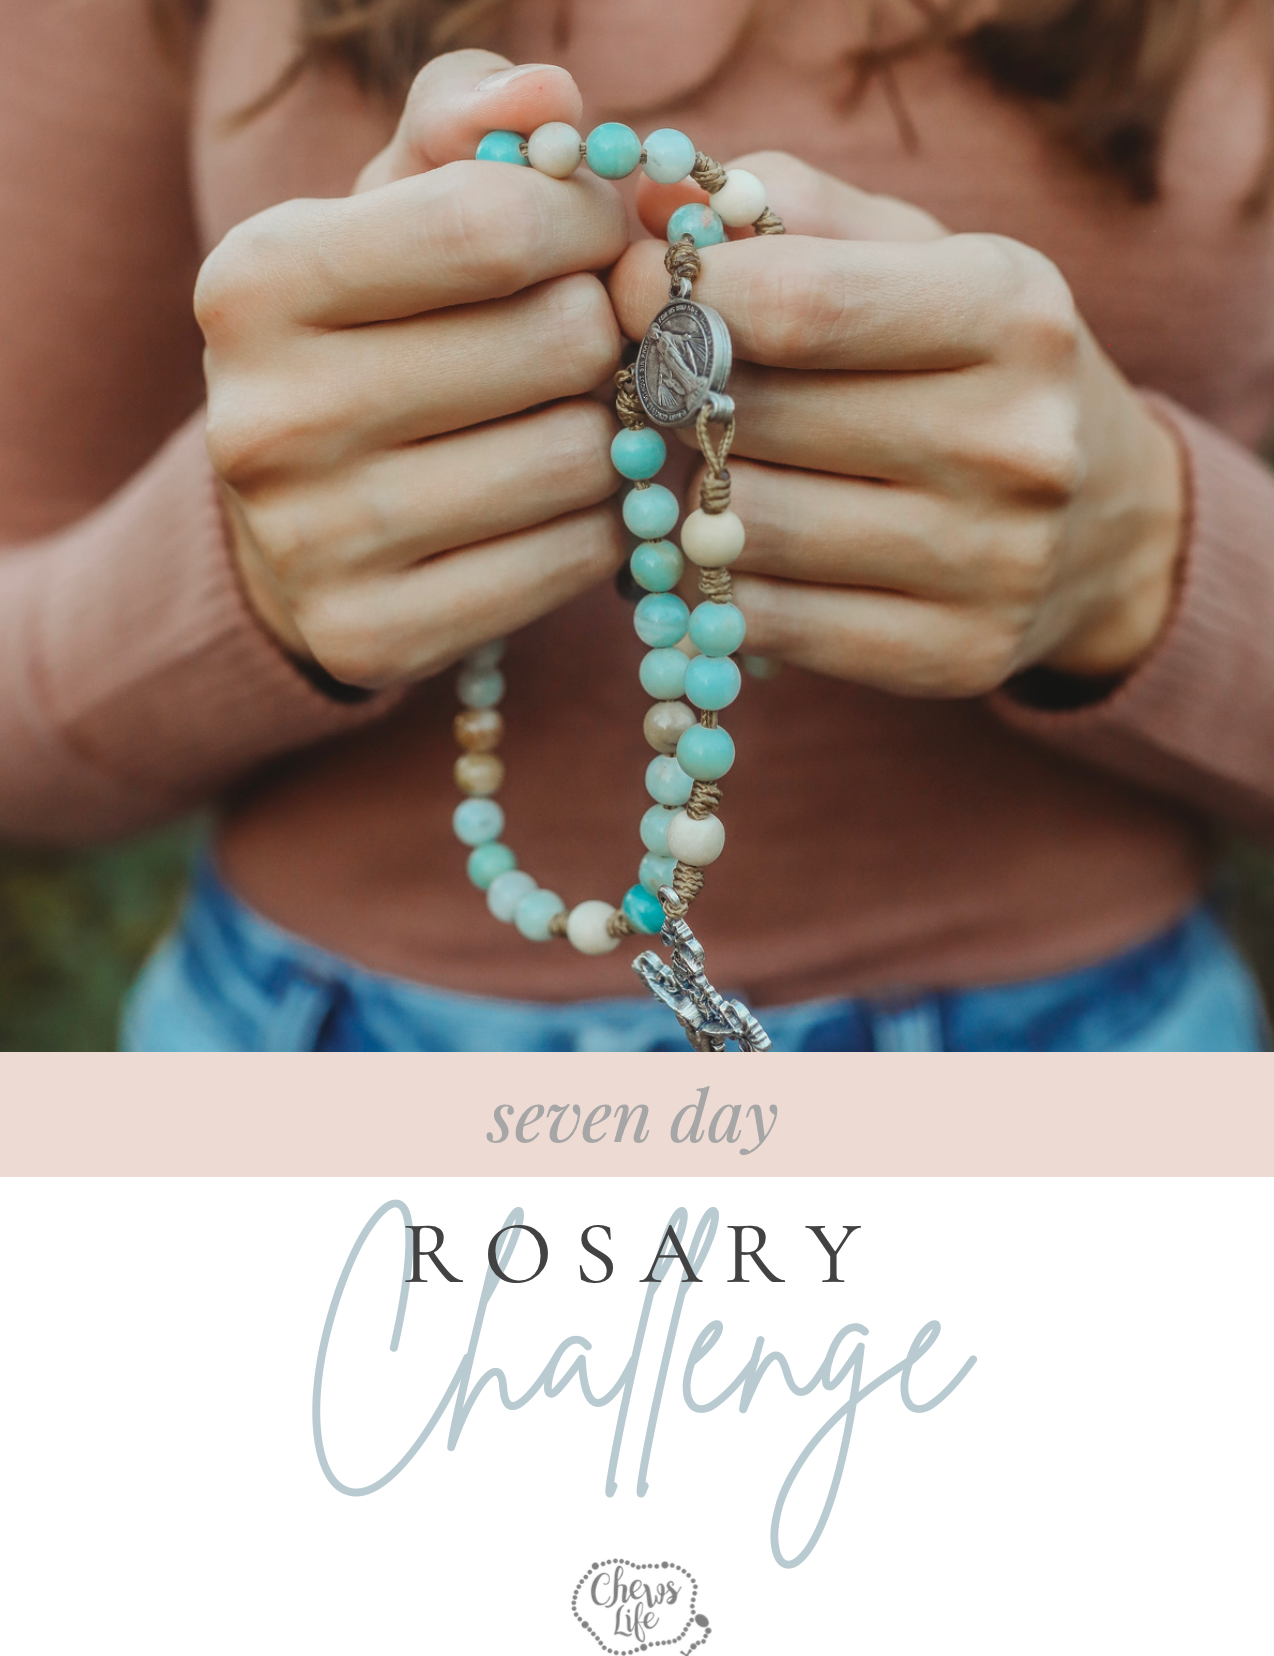 chews-life-7-day-rosary-challenge-31216404005040.png